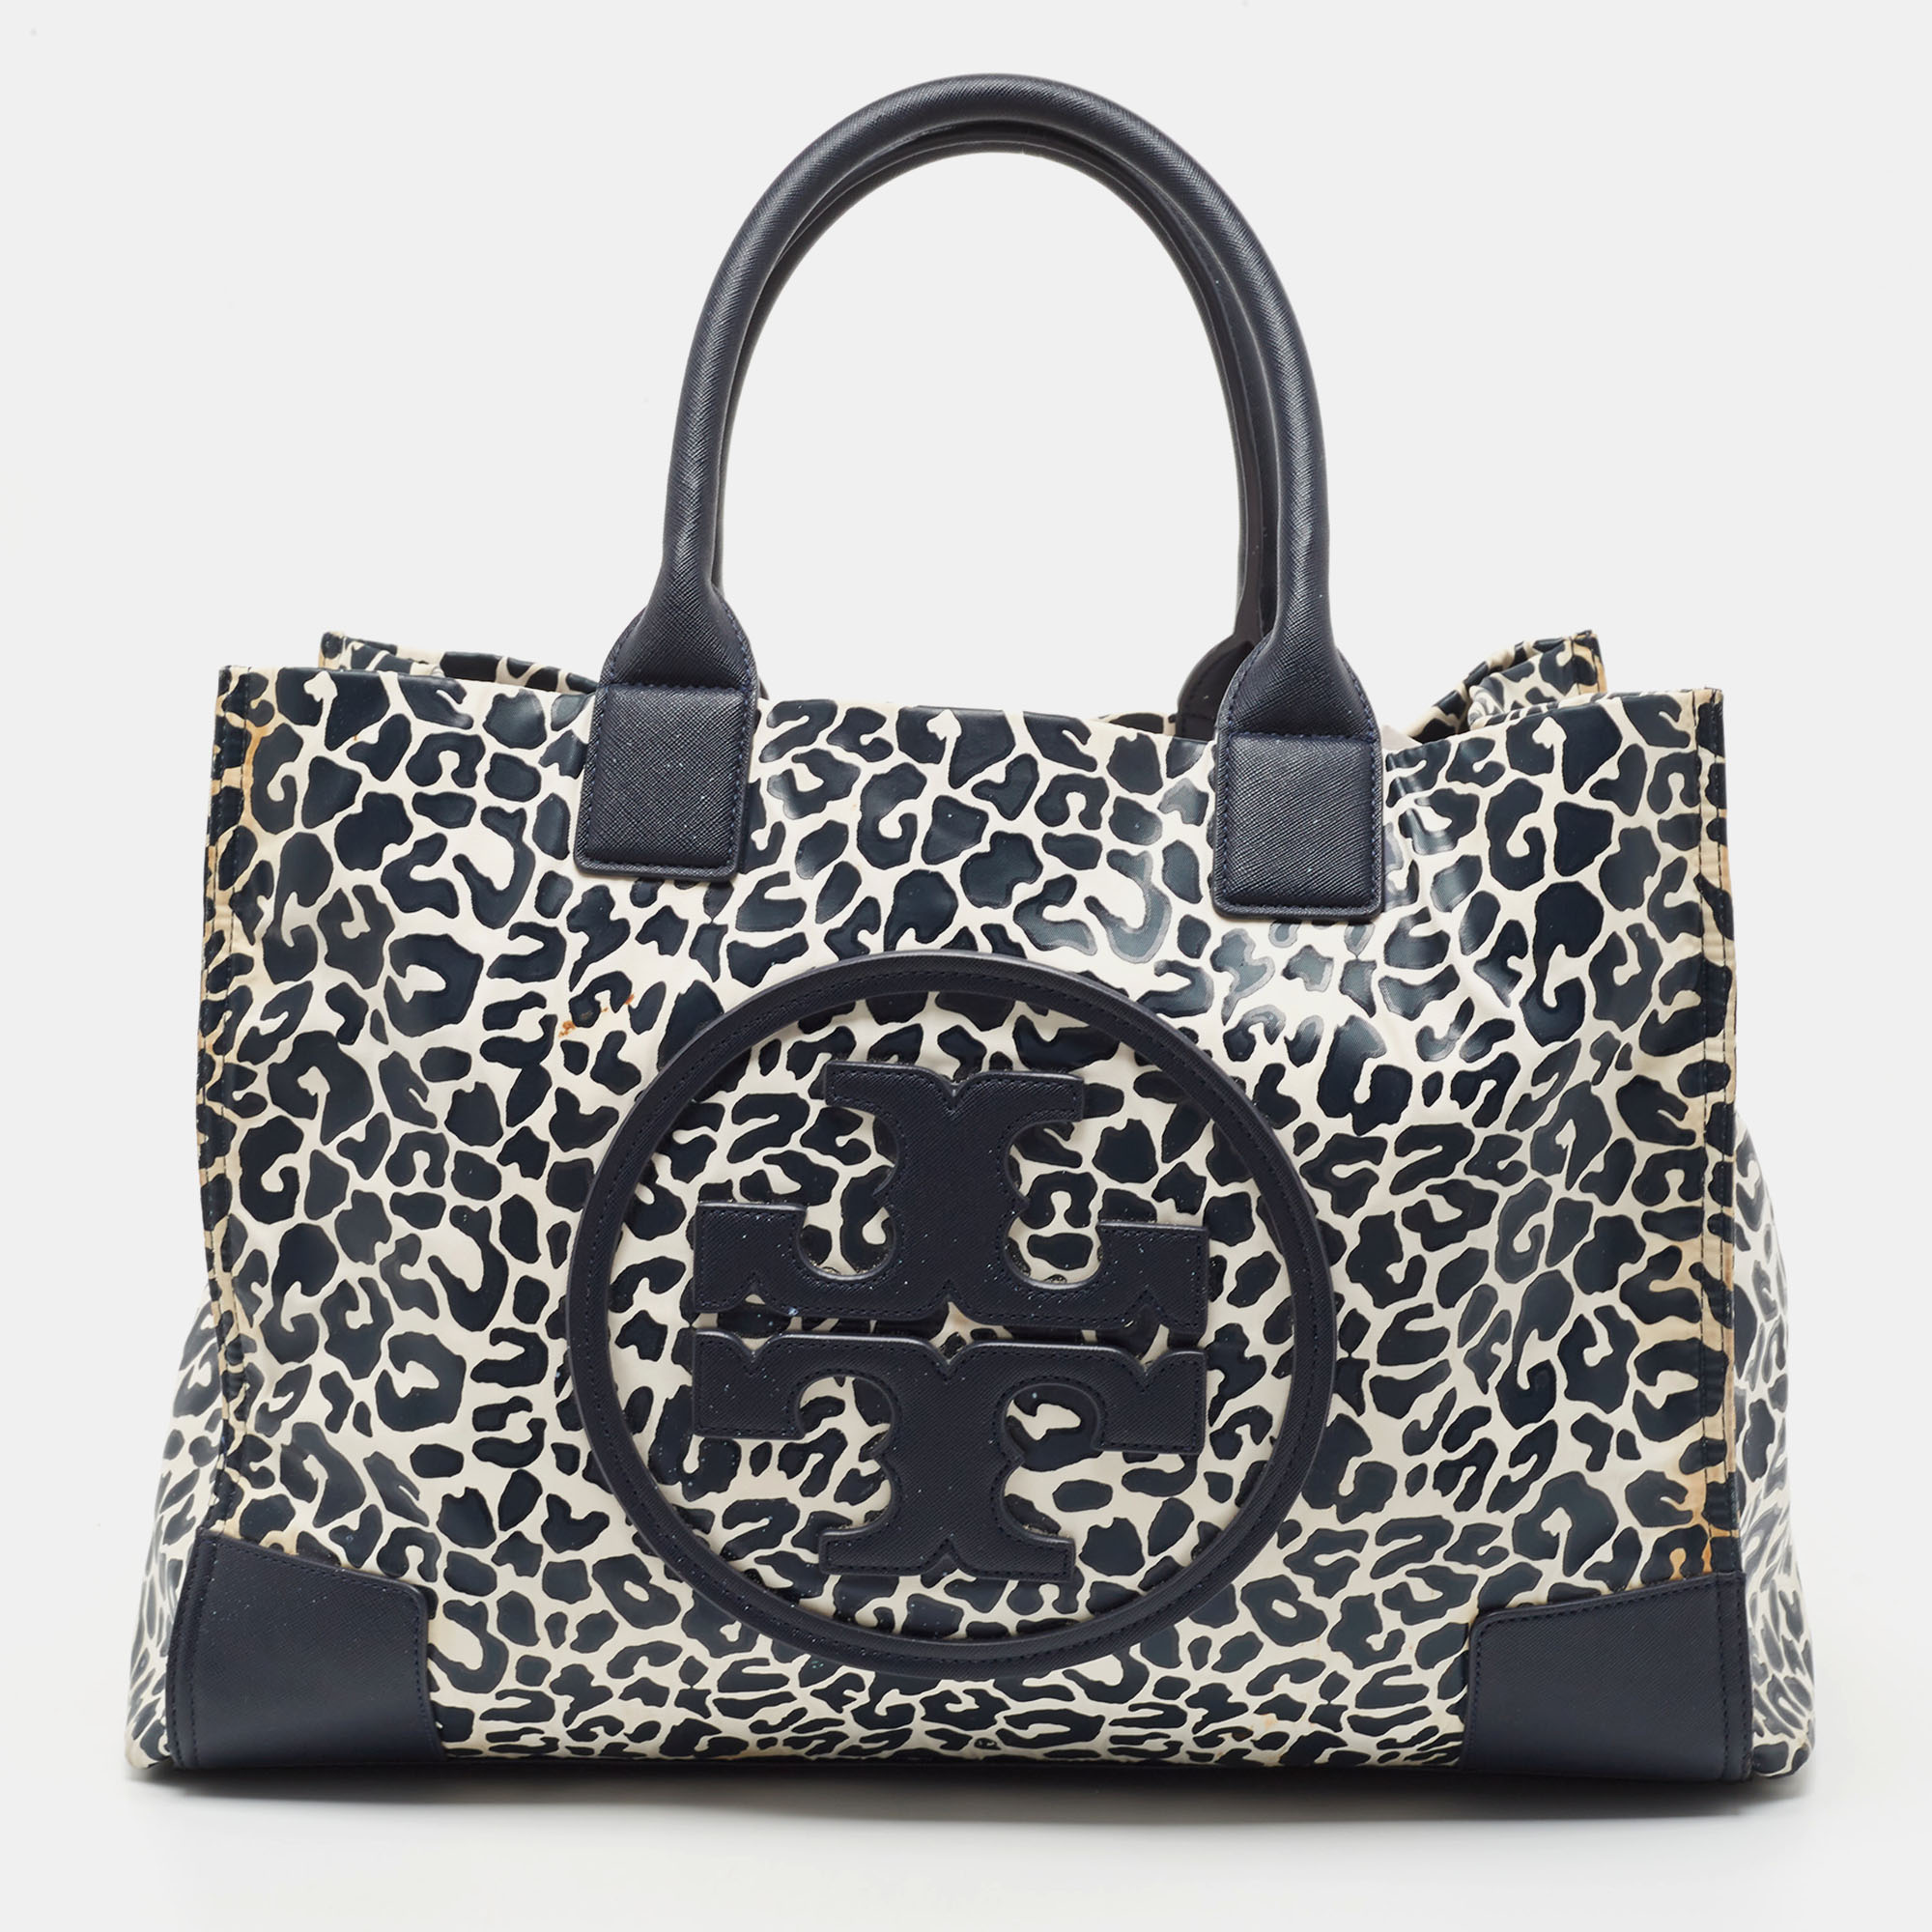 This Tory Burch Ella tote is made just for the handbag lover in you. Crafted from nylon the bag features the logo on the front dual top handles and a nylon lined interior. The spacious interior makes it more functional.